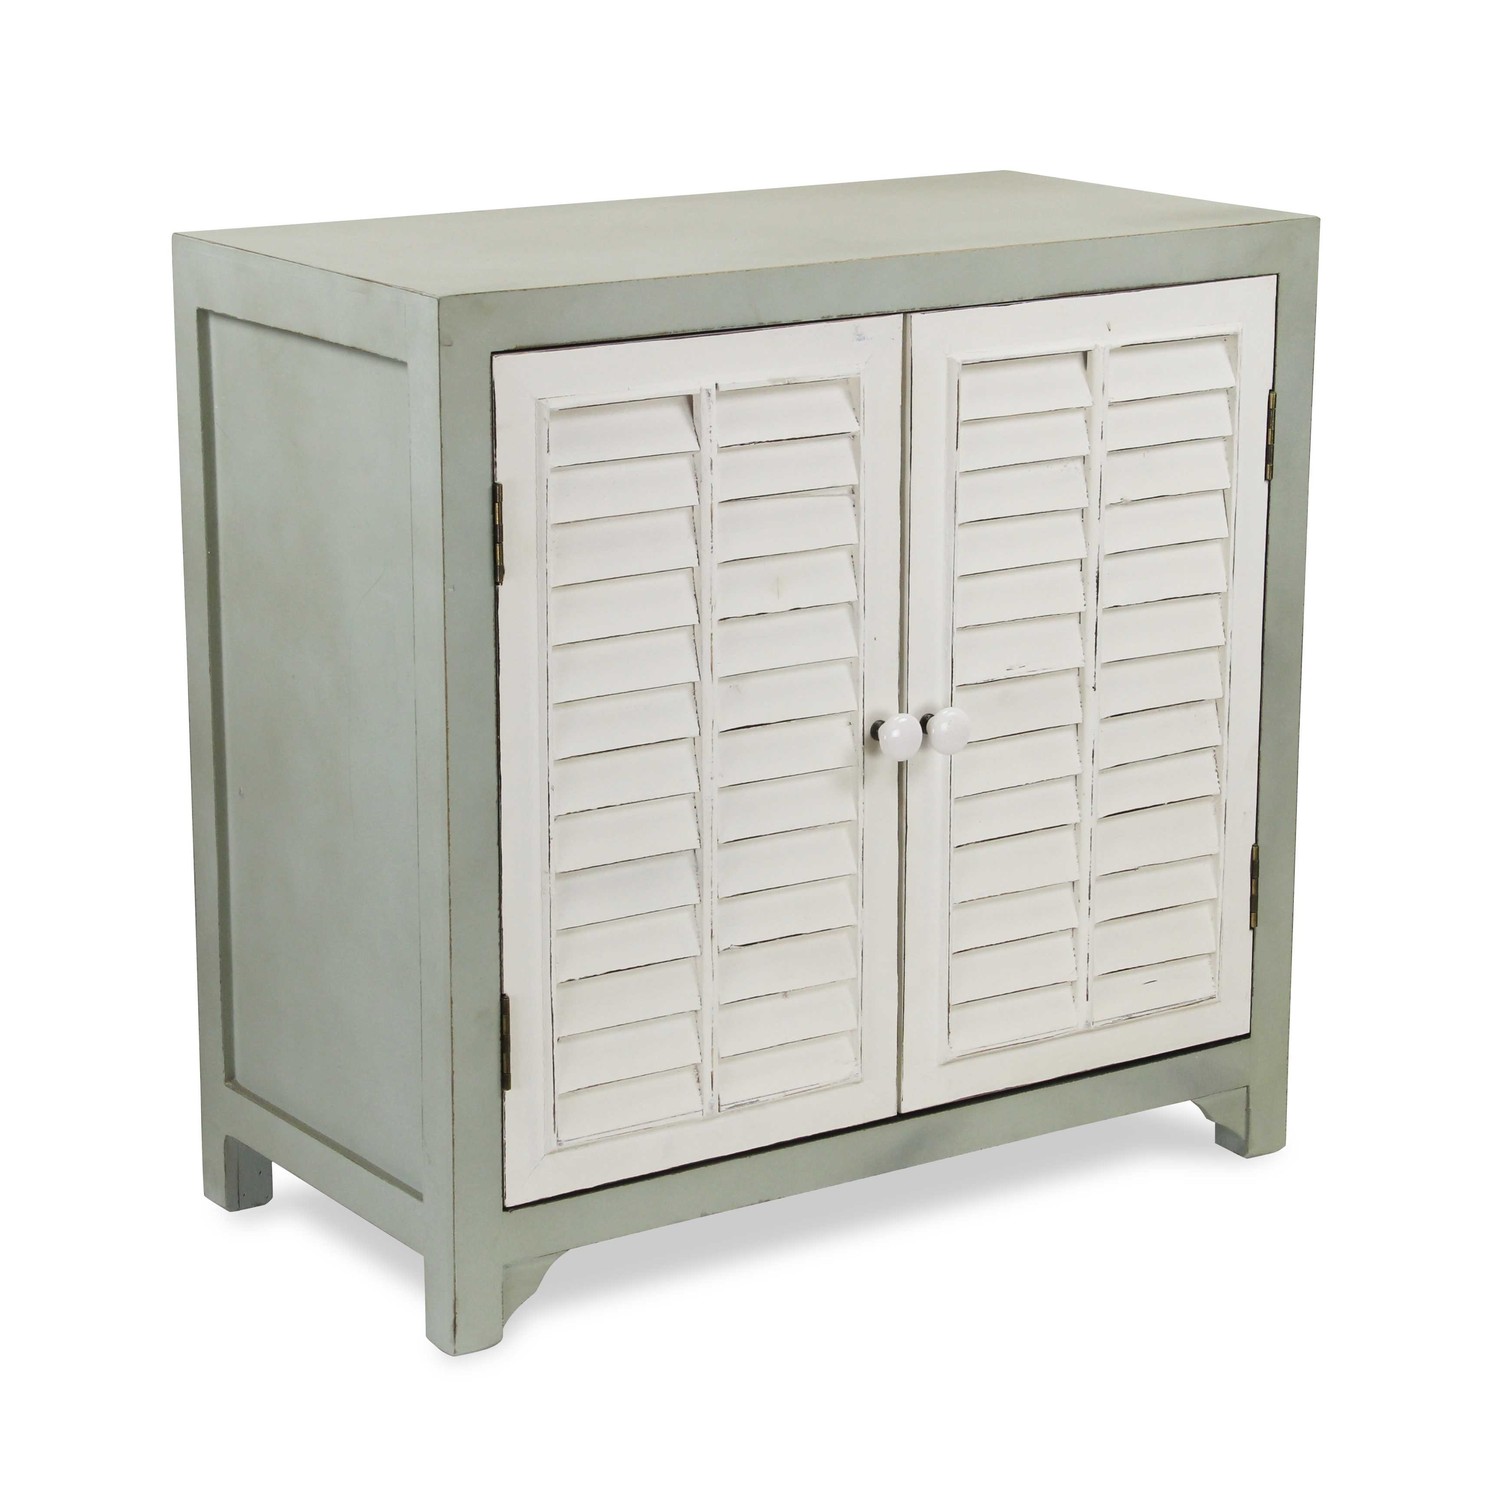 27" Coastal Blue Wooden with 2 off white shutter style doors Cabinet